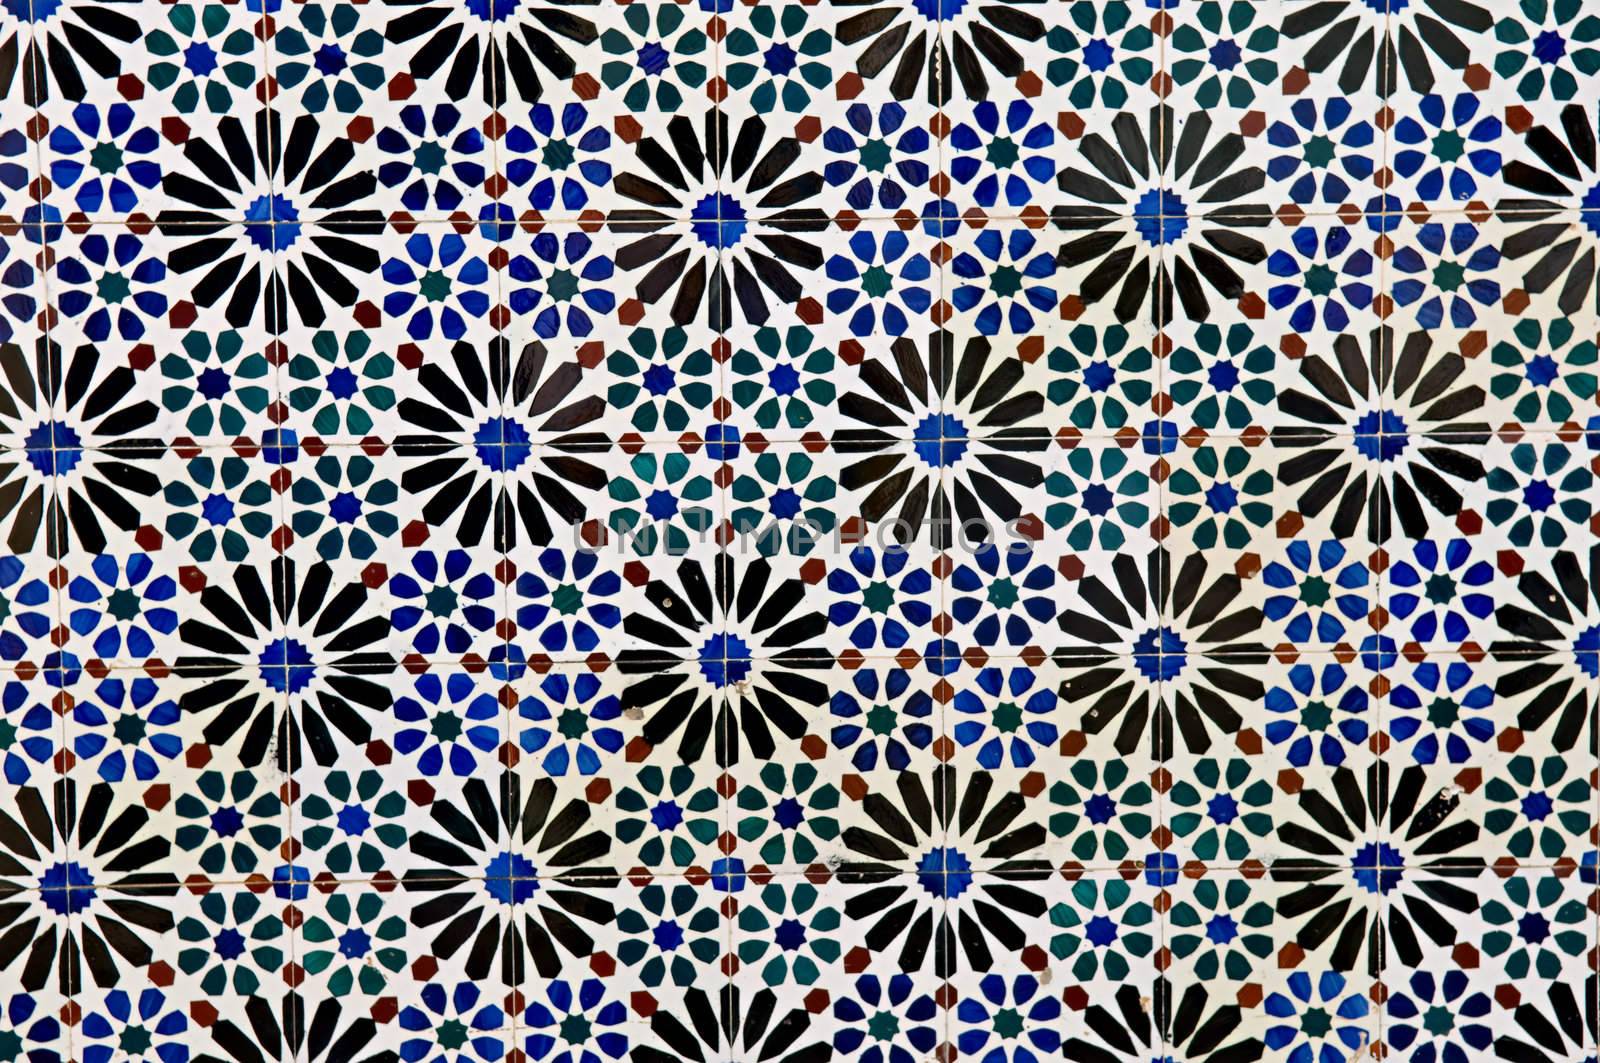 The abstract pattern of Portuguese painted tiles with interesting designs